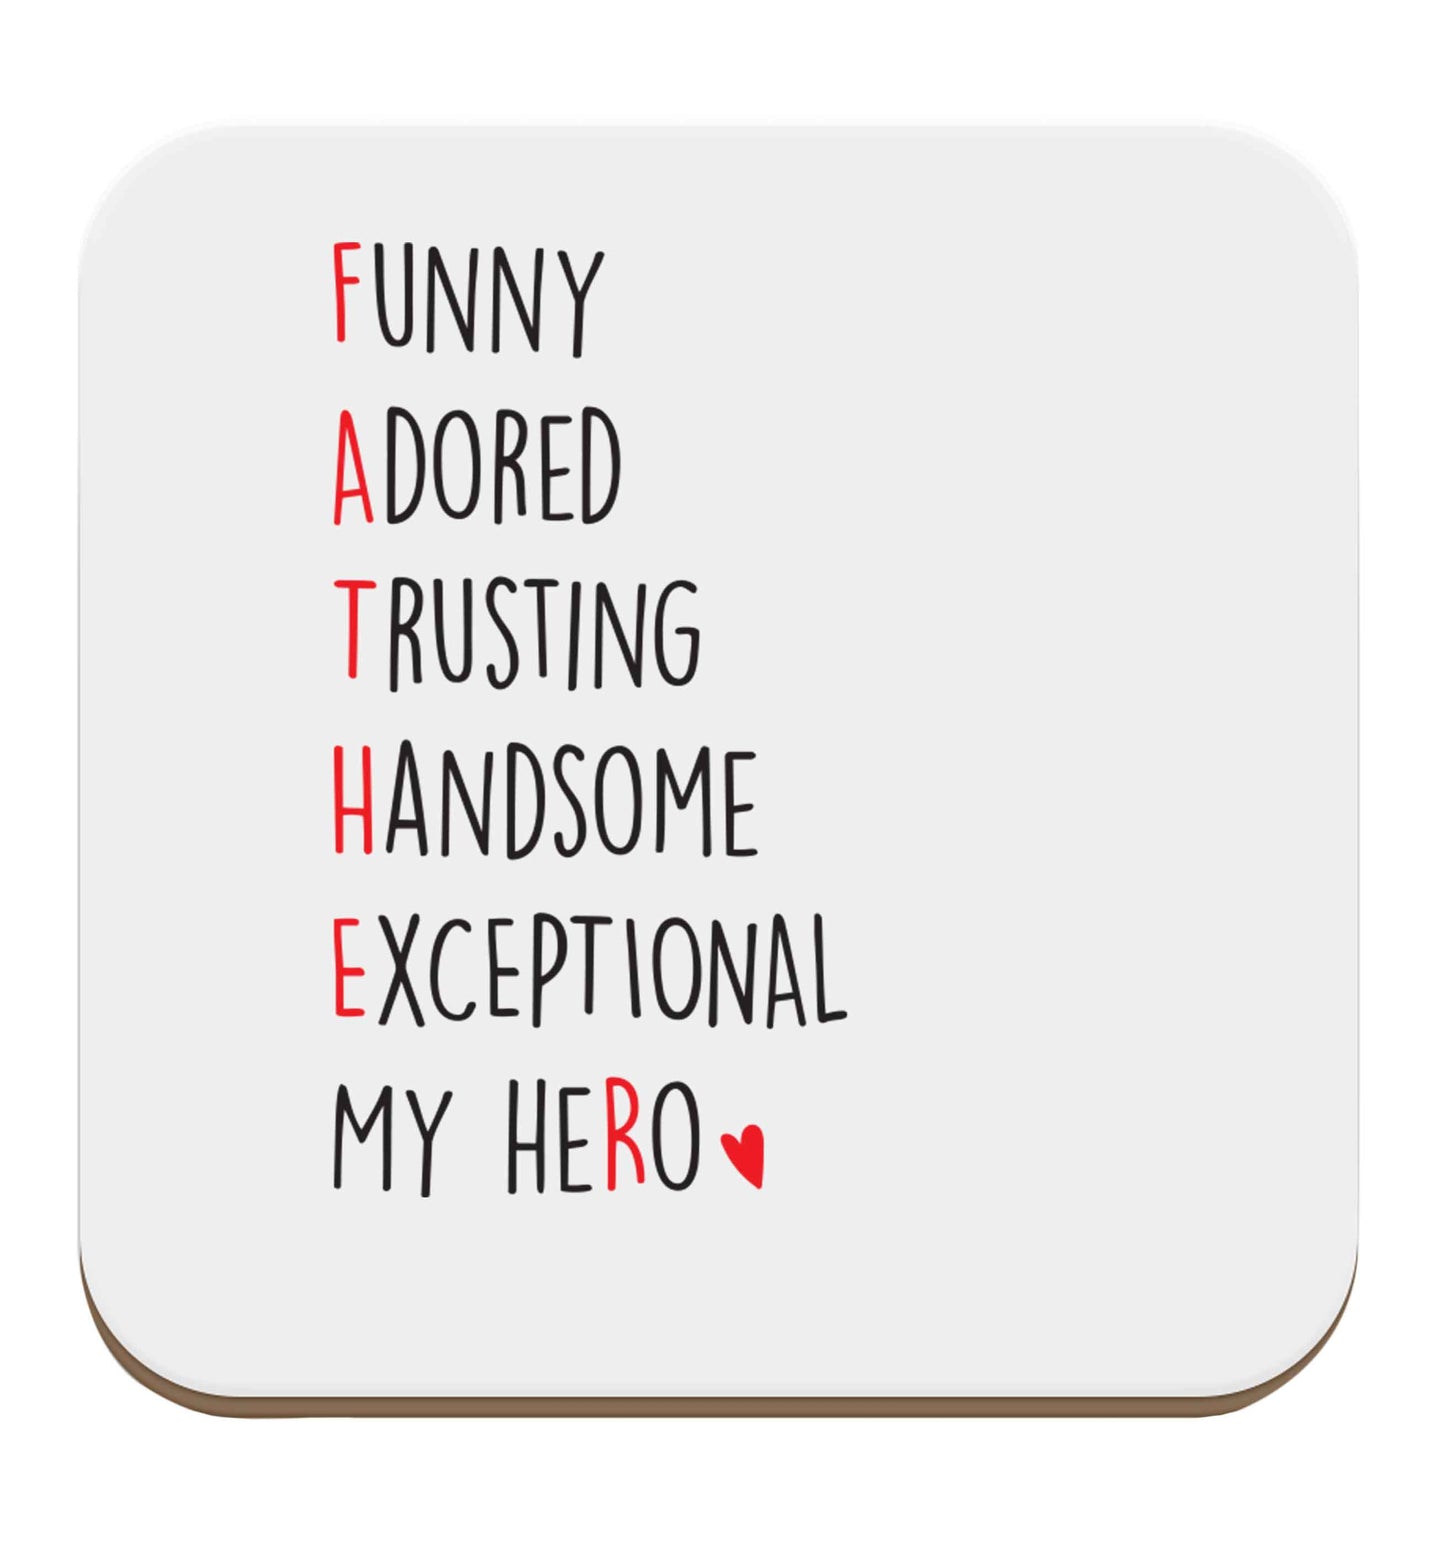 Father meaning hero acrostic poem set of four coasters